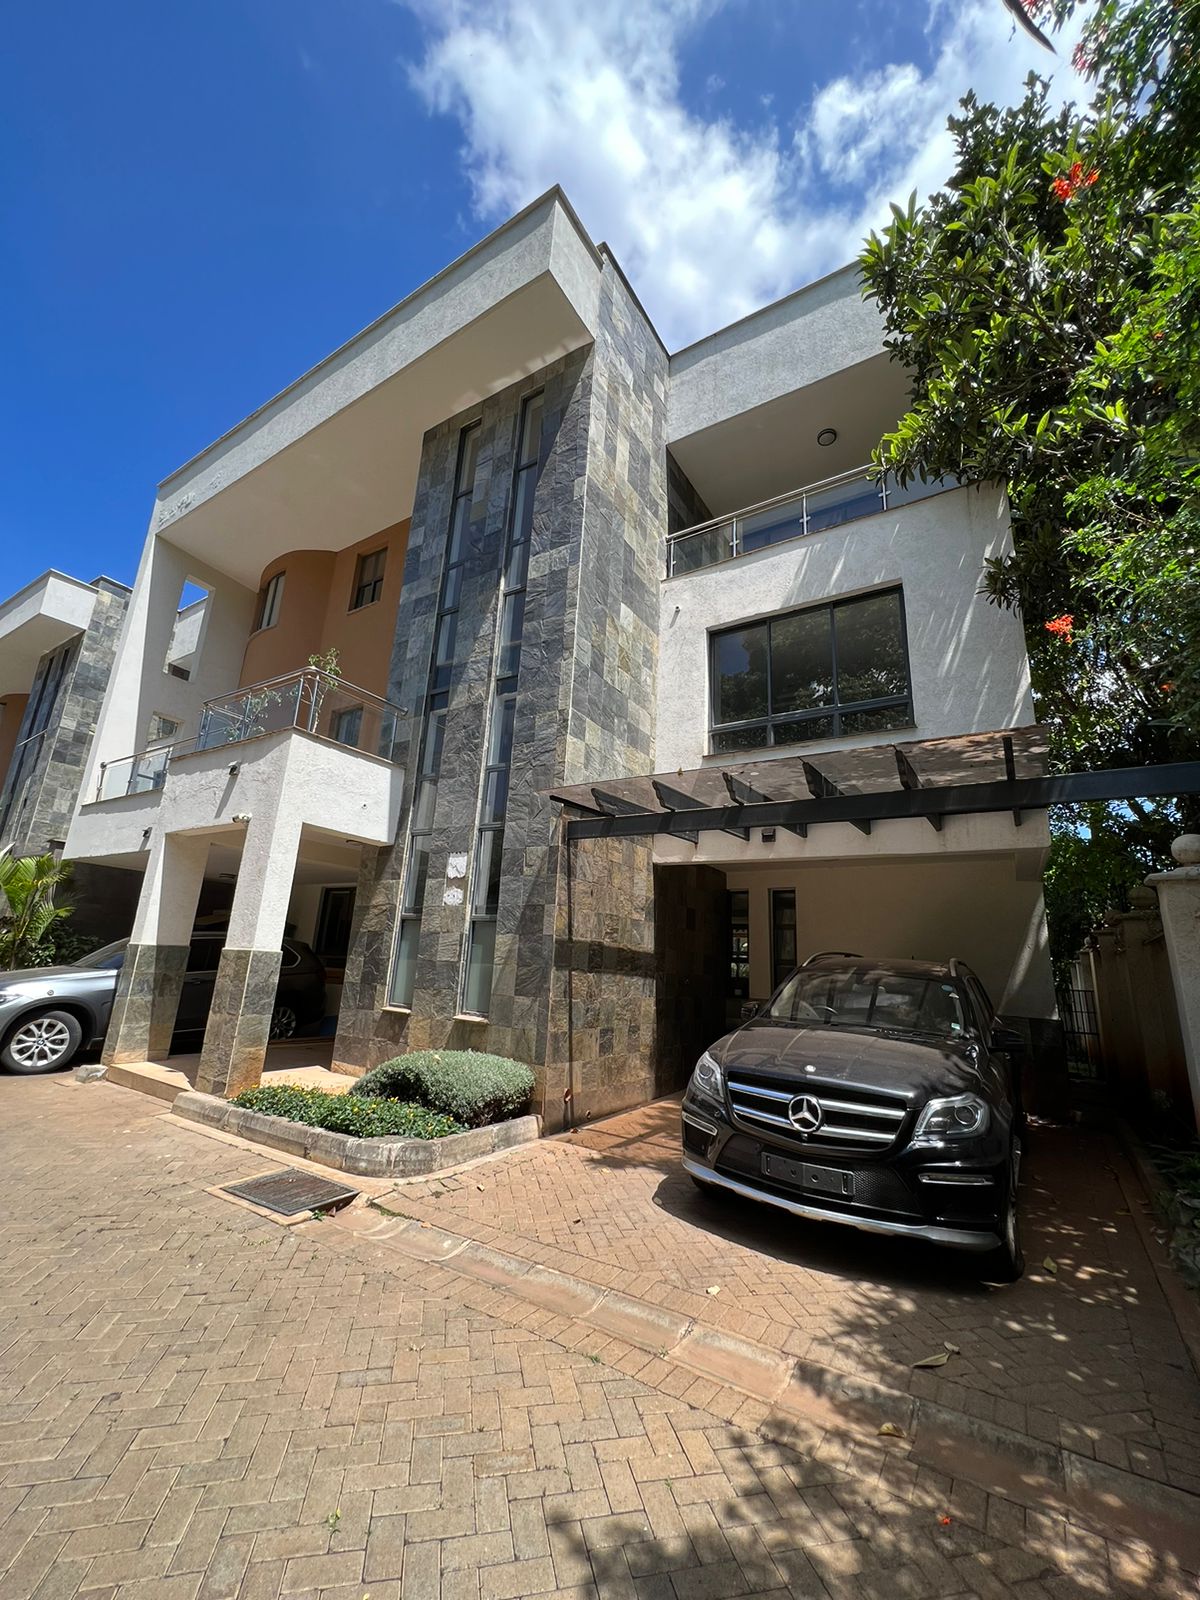 5 bedroom townhouses plus sq for rent and sale in the leafy suburb of lavington area